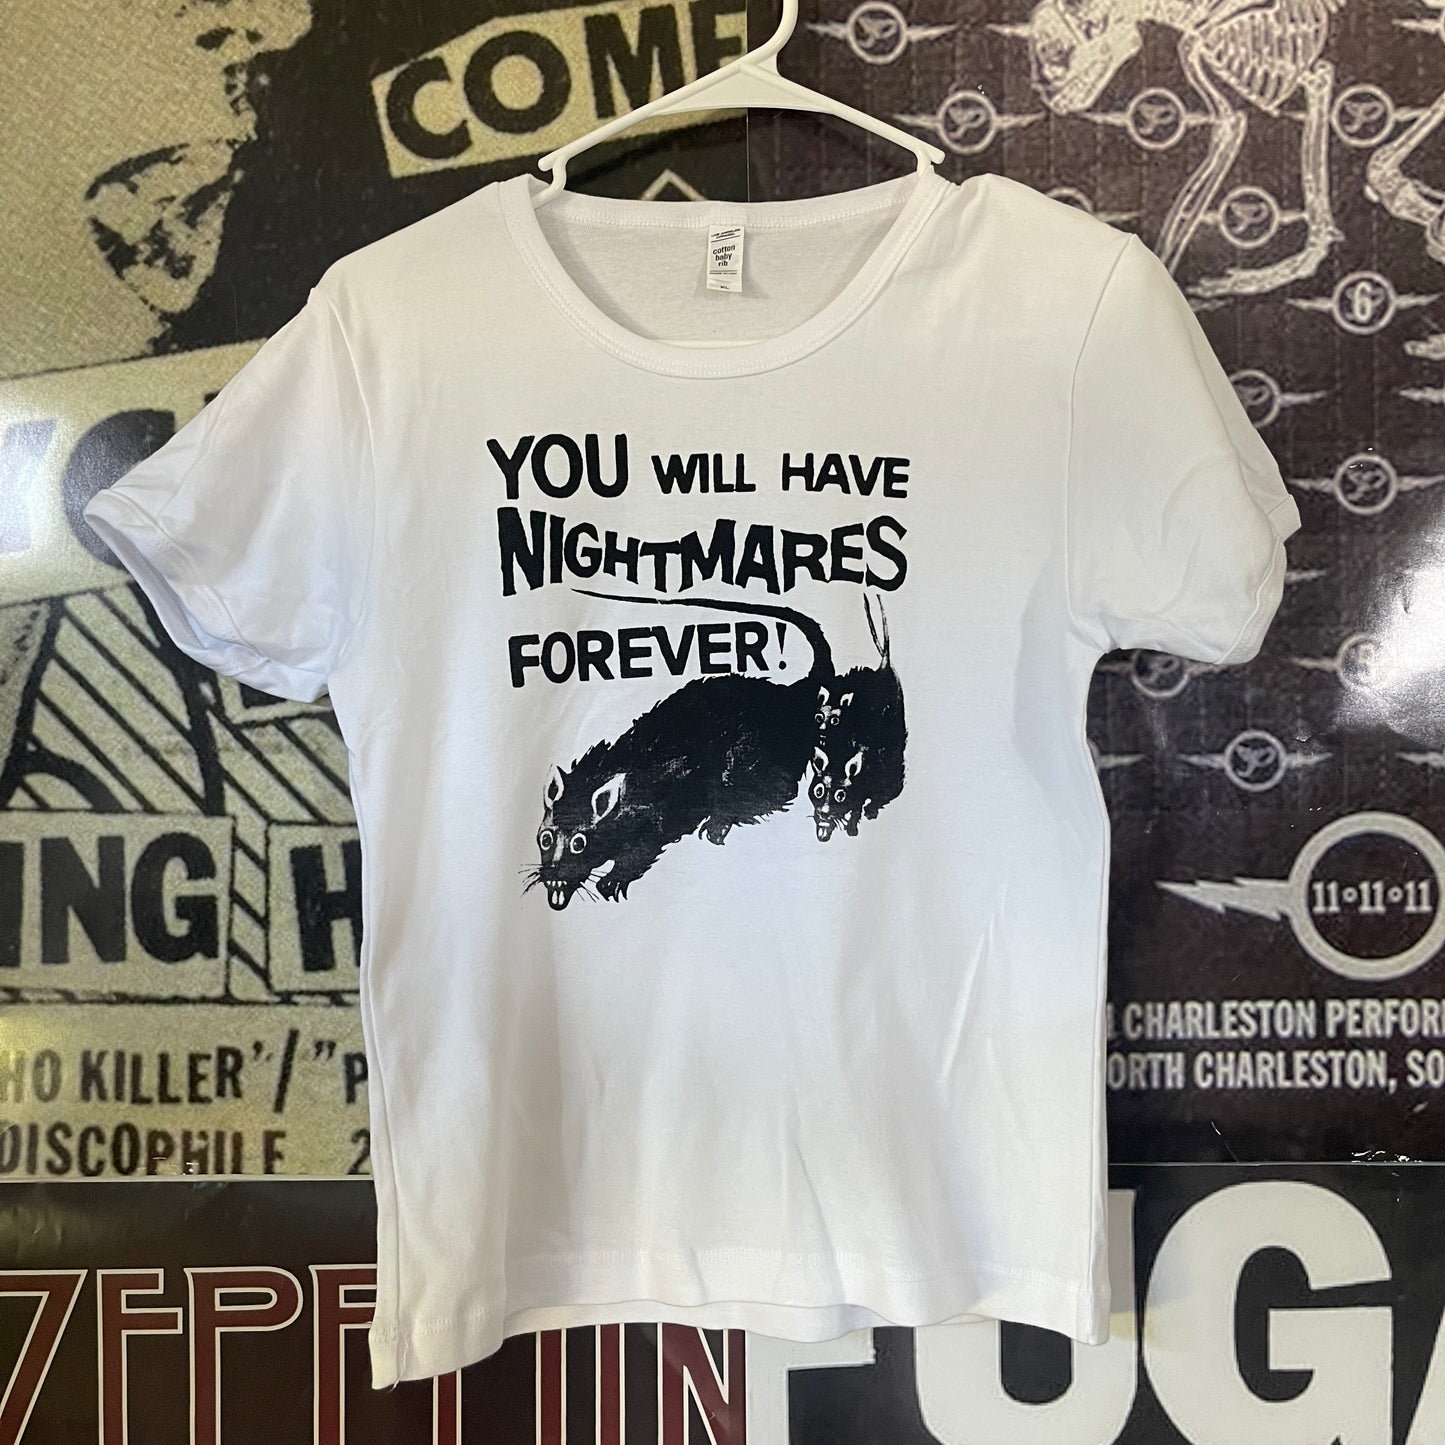 Nightmares forever long white baby tee